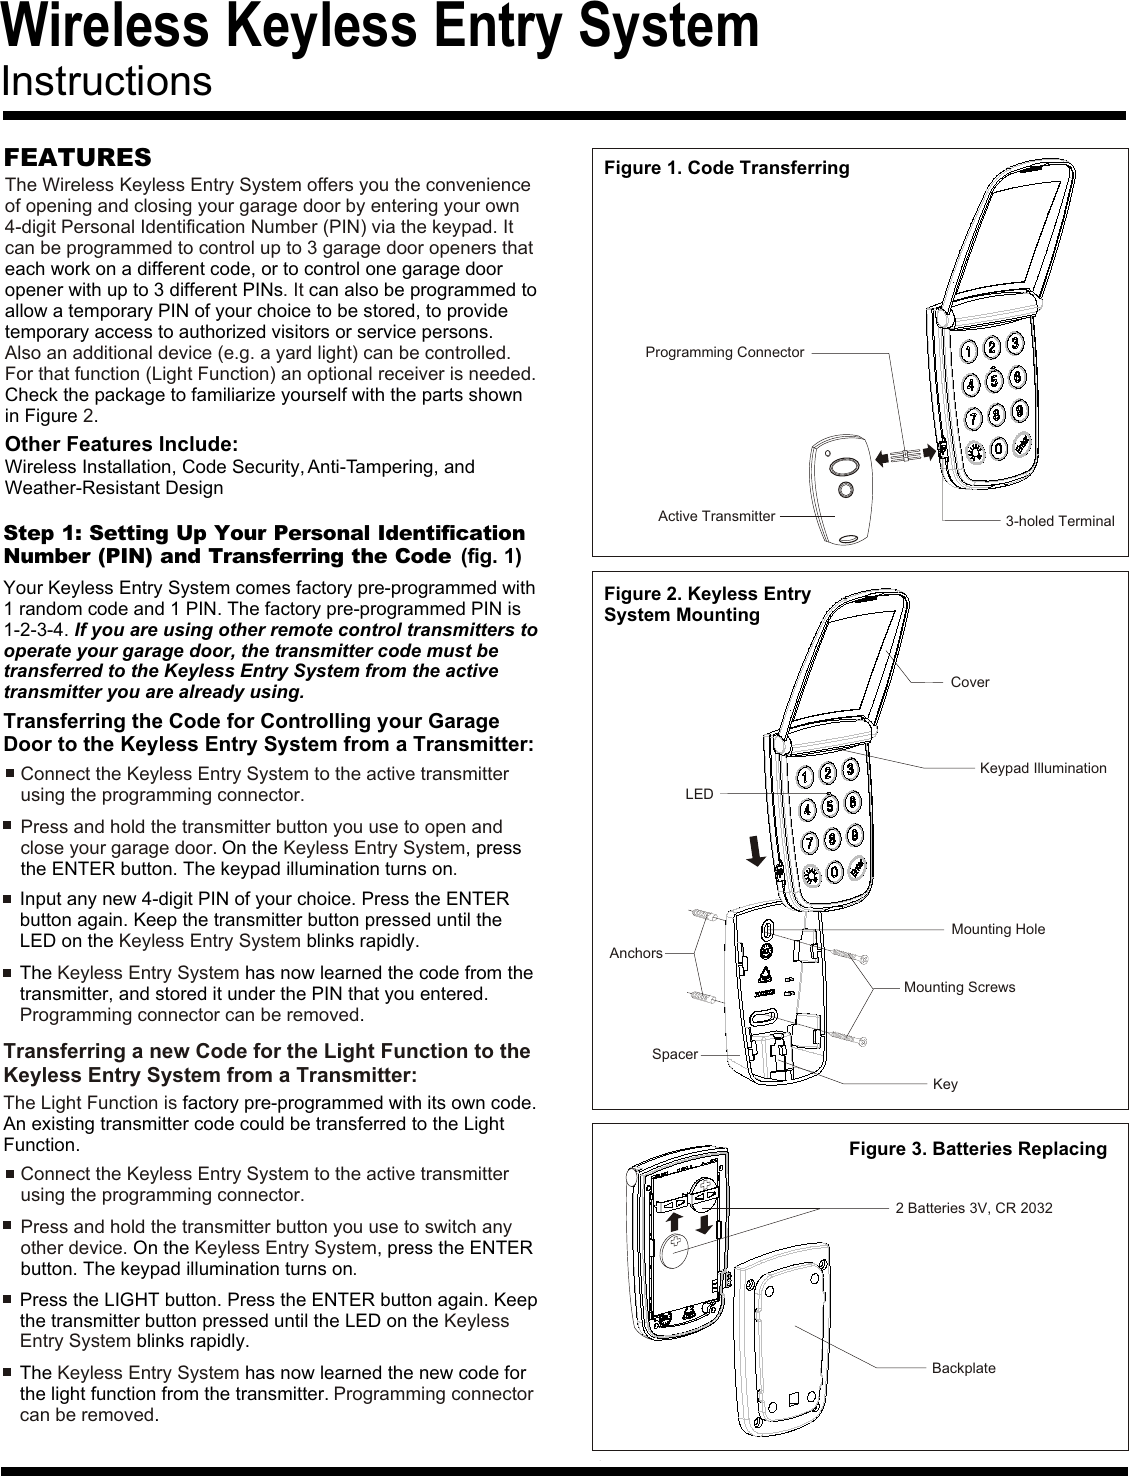 Wireless Keyless Entry System InstructionsFEATURES Figure 1. Code TransferringFigure 3. Batteries ReplacingThe Wireless Keyless Entry System offers you the convenience of opening and closing your garage door by entering your own 4-digit Personal Identification Number (PIN) via the keypad. It can be programmed to control up to 3 garage door openers that  . ItAlso an additional device (e.g. a yard light) can be controlled. For that function (Light Function) an optional receiver is needed.2each work on a different code, or to control one garage door opener with up to 3 different PINs  can also be programmed to allow a temporary PIN of your choice to be stored, to provide temporary access to authorized visitors or service persons.Check the package to familiarize yourself with the parts shown in Figure  .Other Features Include:Wireless Installation, Code Security, Anti-Tampering, andWeather-Resistant DesignStep 1: Setting Up Your Personal IdentificationNumber (PIN) and Transferring the Code (fig. 1)Your Keyless Entry System comes factory pre-programmed with1 random code and 1 PIN. The factory pre-programmed PIN is1-2-3-4. If you are using other remote control transmitters tooperate your garage door, the transmitter code must be transferred to the Keyless Entry System from the active transmitter you are already using.Transferring the Code for Controlling your Garage Door to the Keyless Entry System from a Transmitter:Connect the Keyless Entry System to the active transmitter using the programming connector.Connect the Keyless Entry System to the active transmitter using the programming connector.Press and hold the transmitter button you use to open and close your garage door.  Keyless Entry System.On the  , press the ENTER button. The keypad illumination turns onPress and hold the transmitter button you use to switch any other device.  Keyless Entry System.On the  , press the ENTER button. The keypad illumination turns onThe   has now learned the code from the transmitter, and stored it under the PIN that you entered. .Keyless Entry SystemProgramming connector can be removedThe   has now learned the new code for the light function from the transmitter. .Keyless Entry SystemProgramming connector can be removedInput any new 4-digit PIN of your choice. Press the ENTER button again. Keep the transmitter button pressed until the LED on the   blinks rapidly.Keyless Entry SystemPress the LIGHT button. Press the ENTER button again. Keep the transmitter button pressed until the LED on the  blinks rapidly.Keyless Entry SystemBackplate2 Batteries 3V, CR 2032Active TransmitterProgramming Connector3-holed TerminalFigure 2. Keyless EntrySystem MountingCoverKeypad IlluminationMounting ScrewsAnchorsSpacerKeyLEDMounting HoleTransferring a new Code for the Light Function to the Keyless Entry System from a Transmitter:The Light Function is factory pre-programmed with its own code. An existing transmitter code could be transferred to the Light Function.